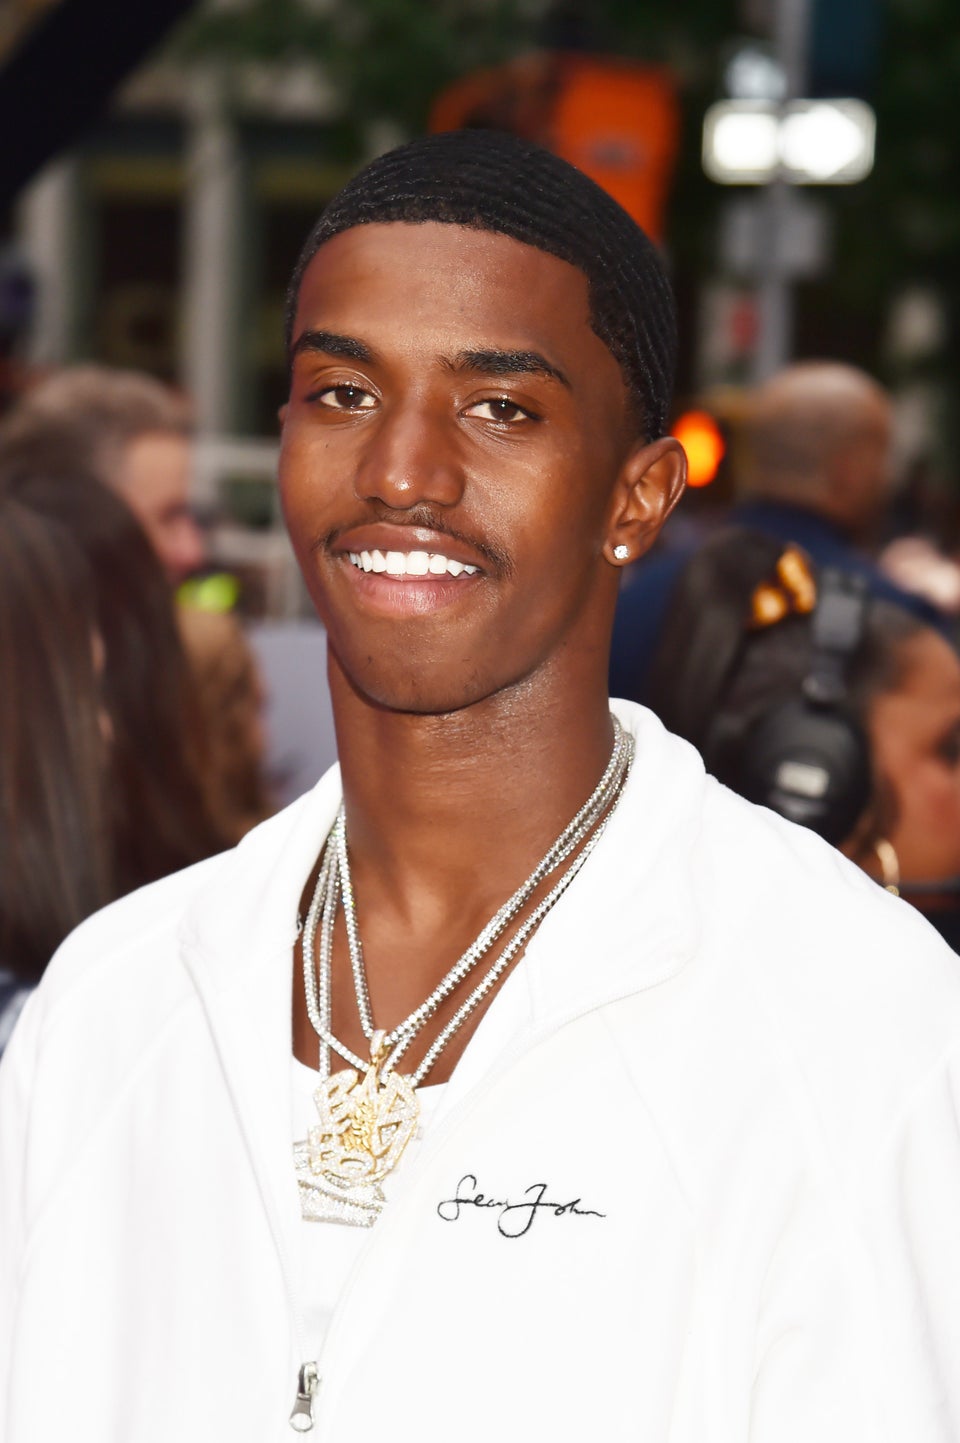 Christian Combs Opens Up About Losing His Mother Kim Porter: ‘My Whole World Stopped’